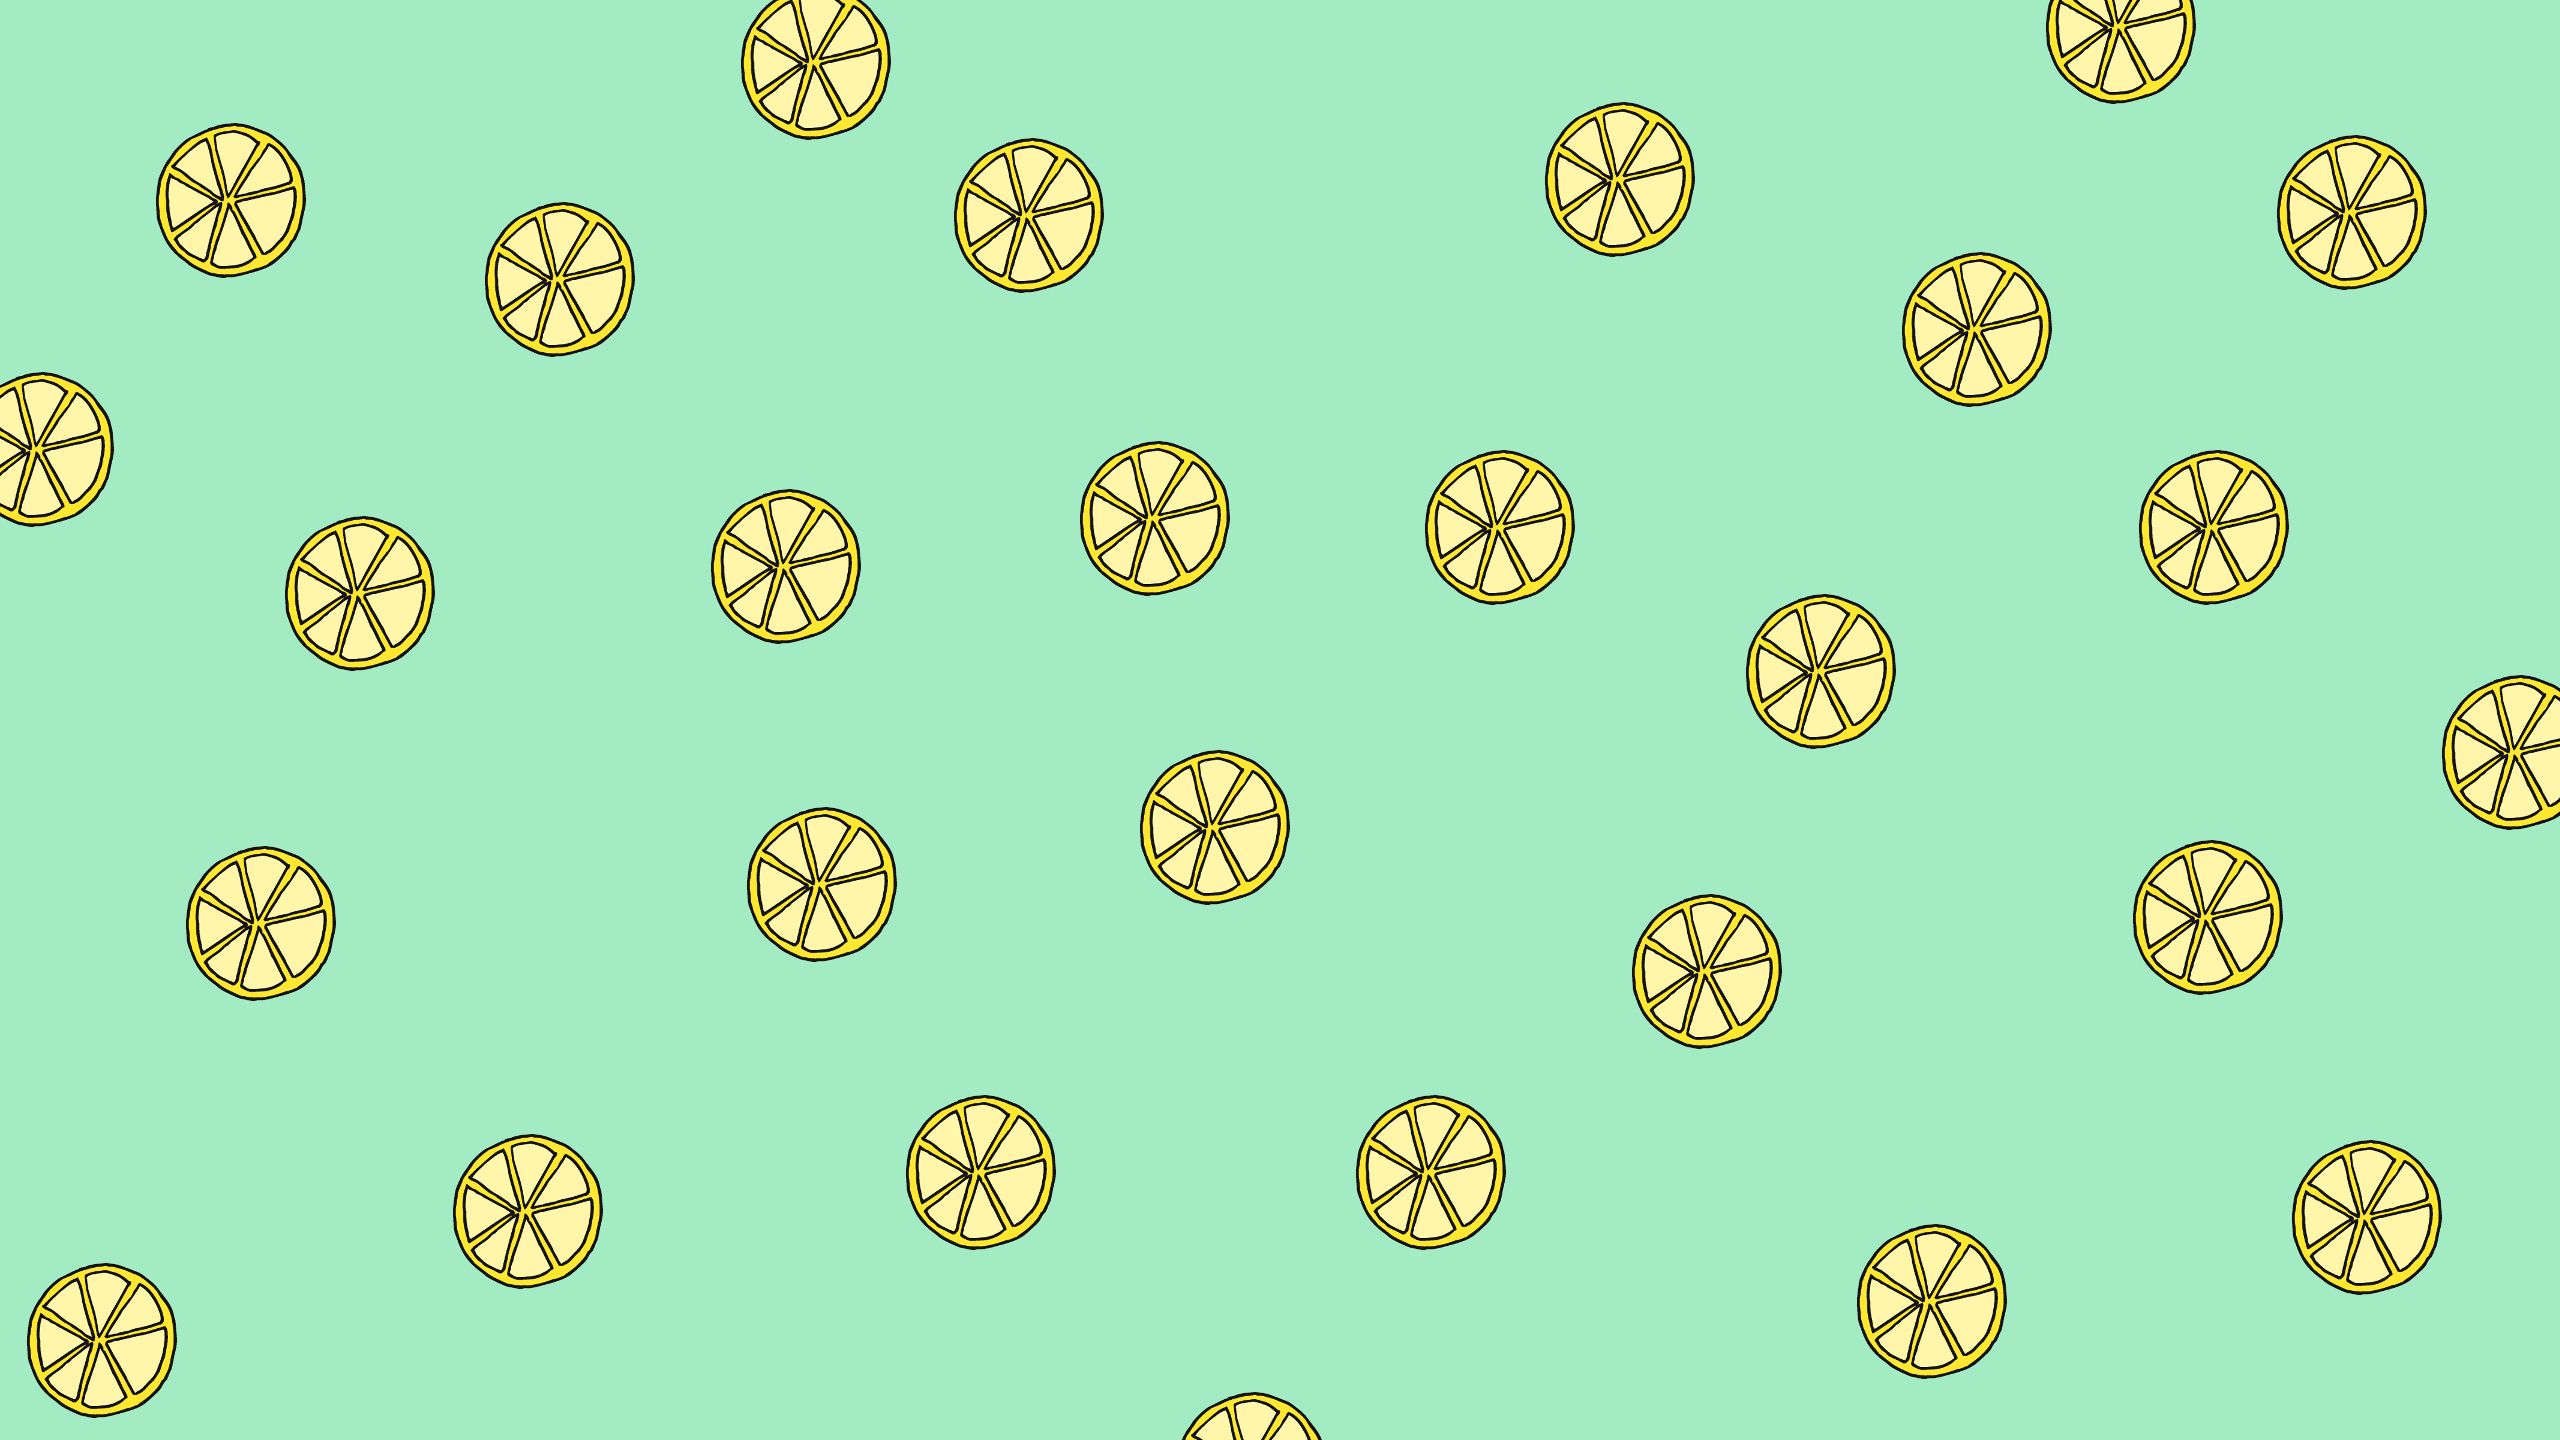 FUN AND FRUITY WALLPAPERS FOR SUMMER